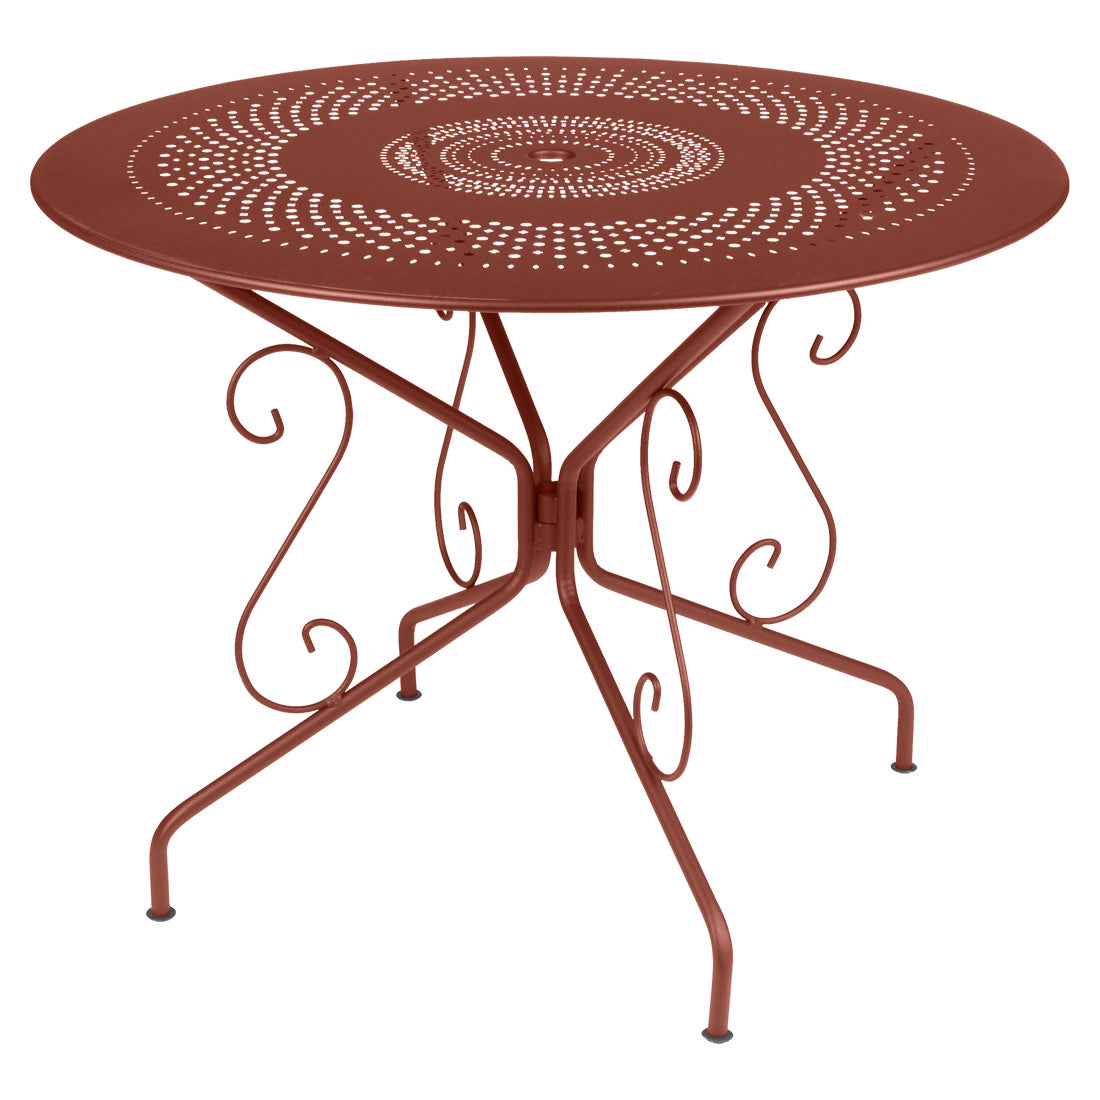 Fermob Montmartre 38 inch Round Dining Table